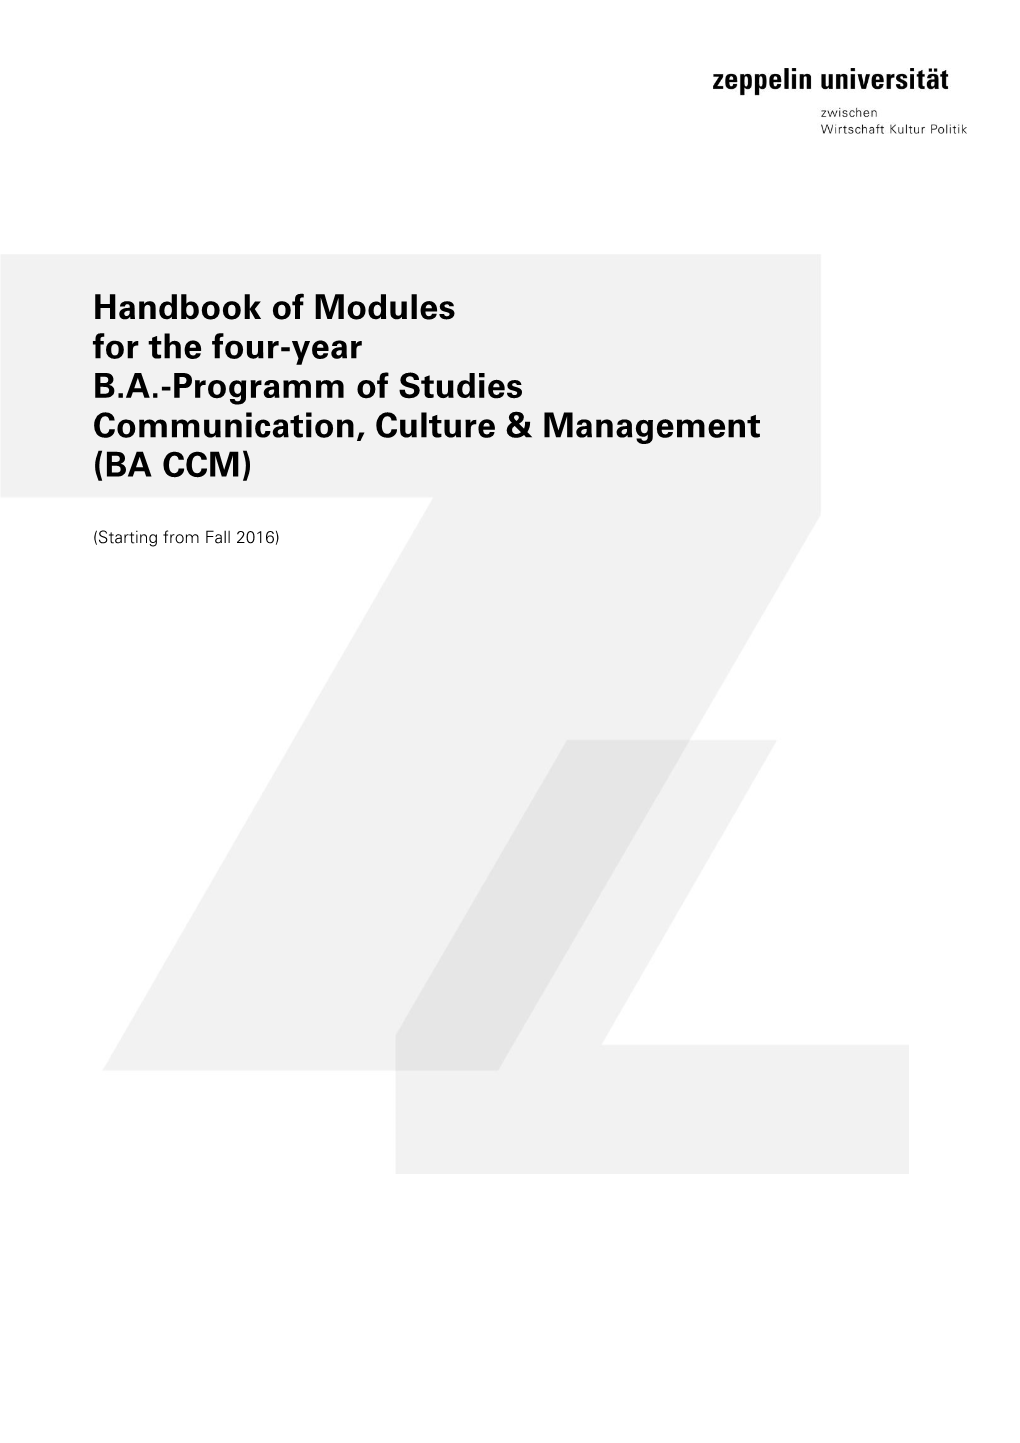 Handbook of Modules for the Four-Year B.A.-Programm of Studies Communication, Culture & Management (BA CCM)